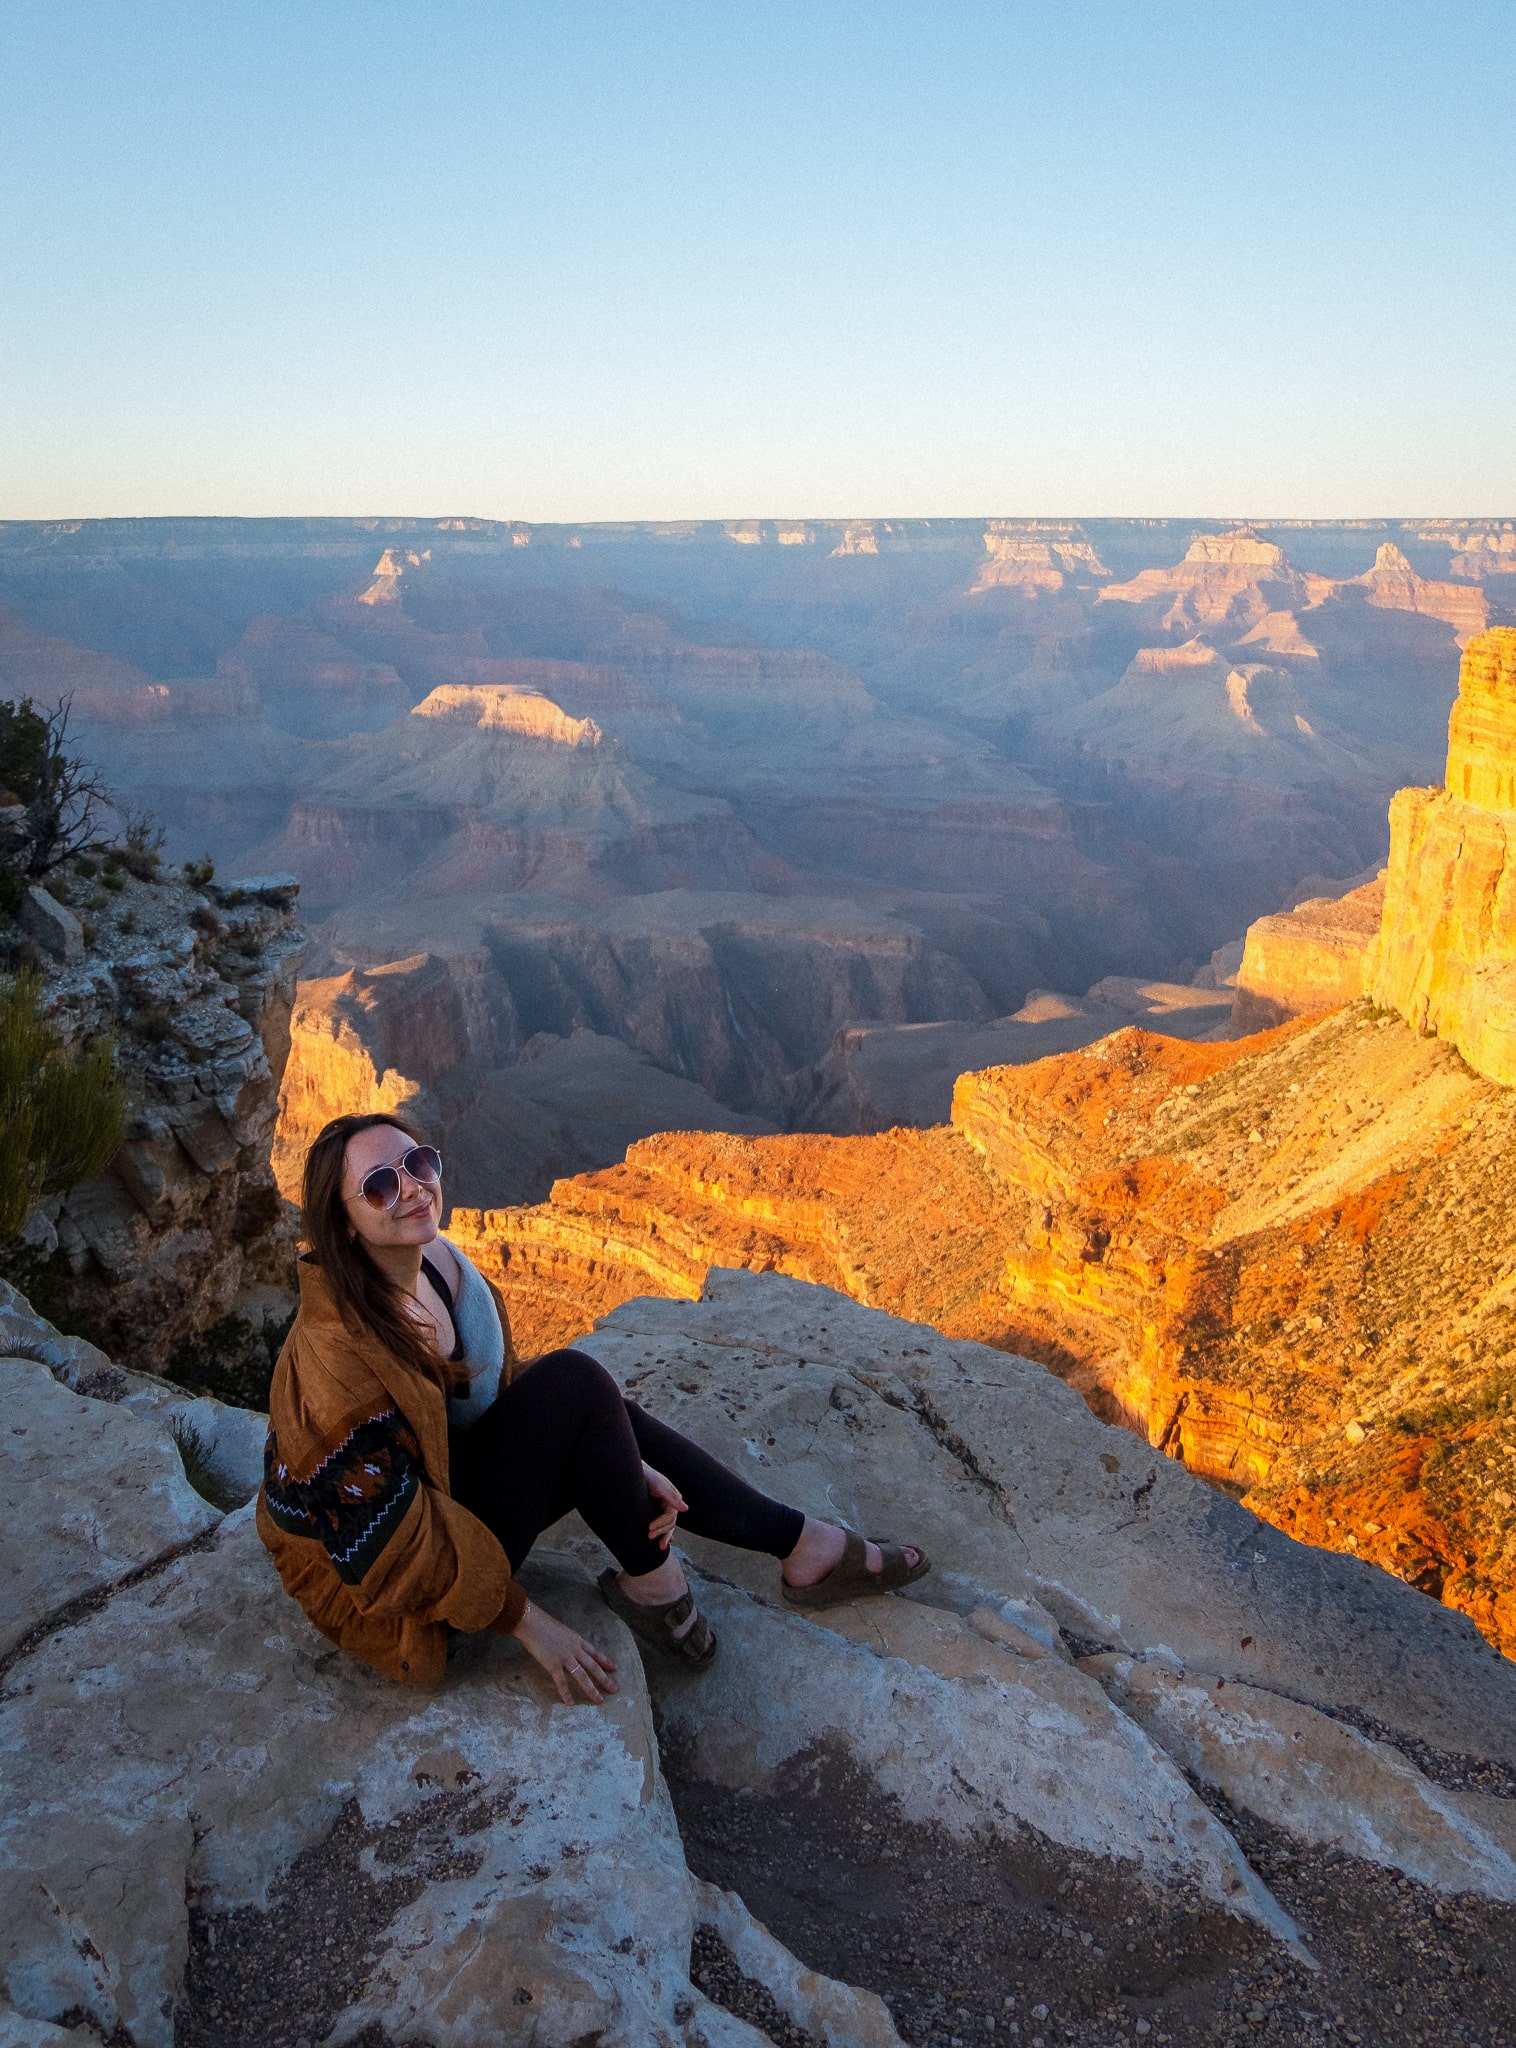 Watching the sunset from Mojave Point in the Grand Canyon, AZ